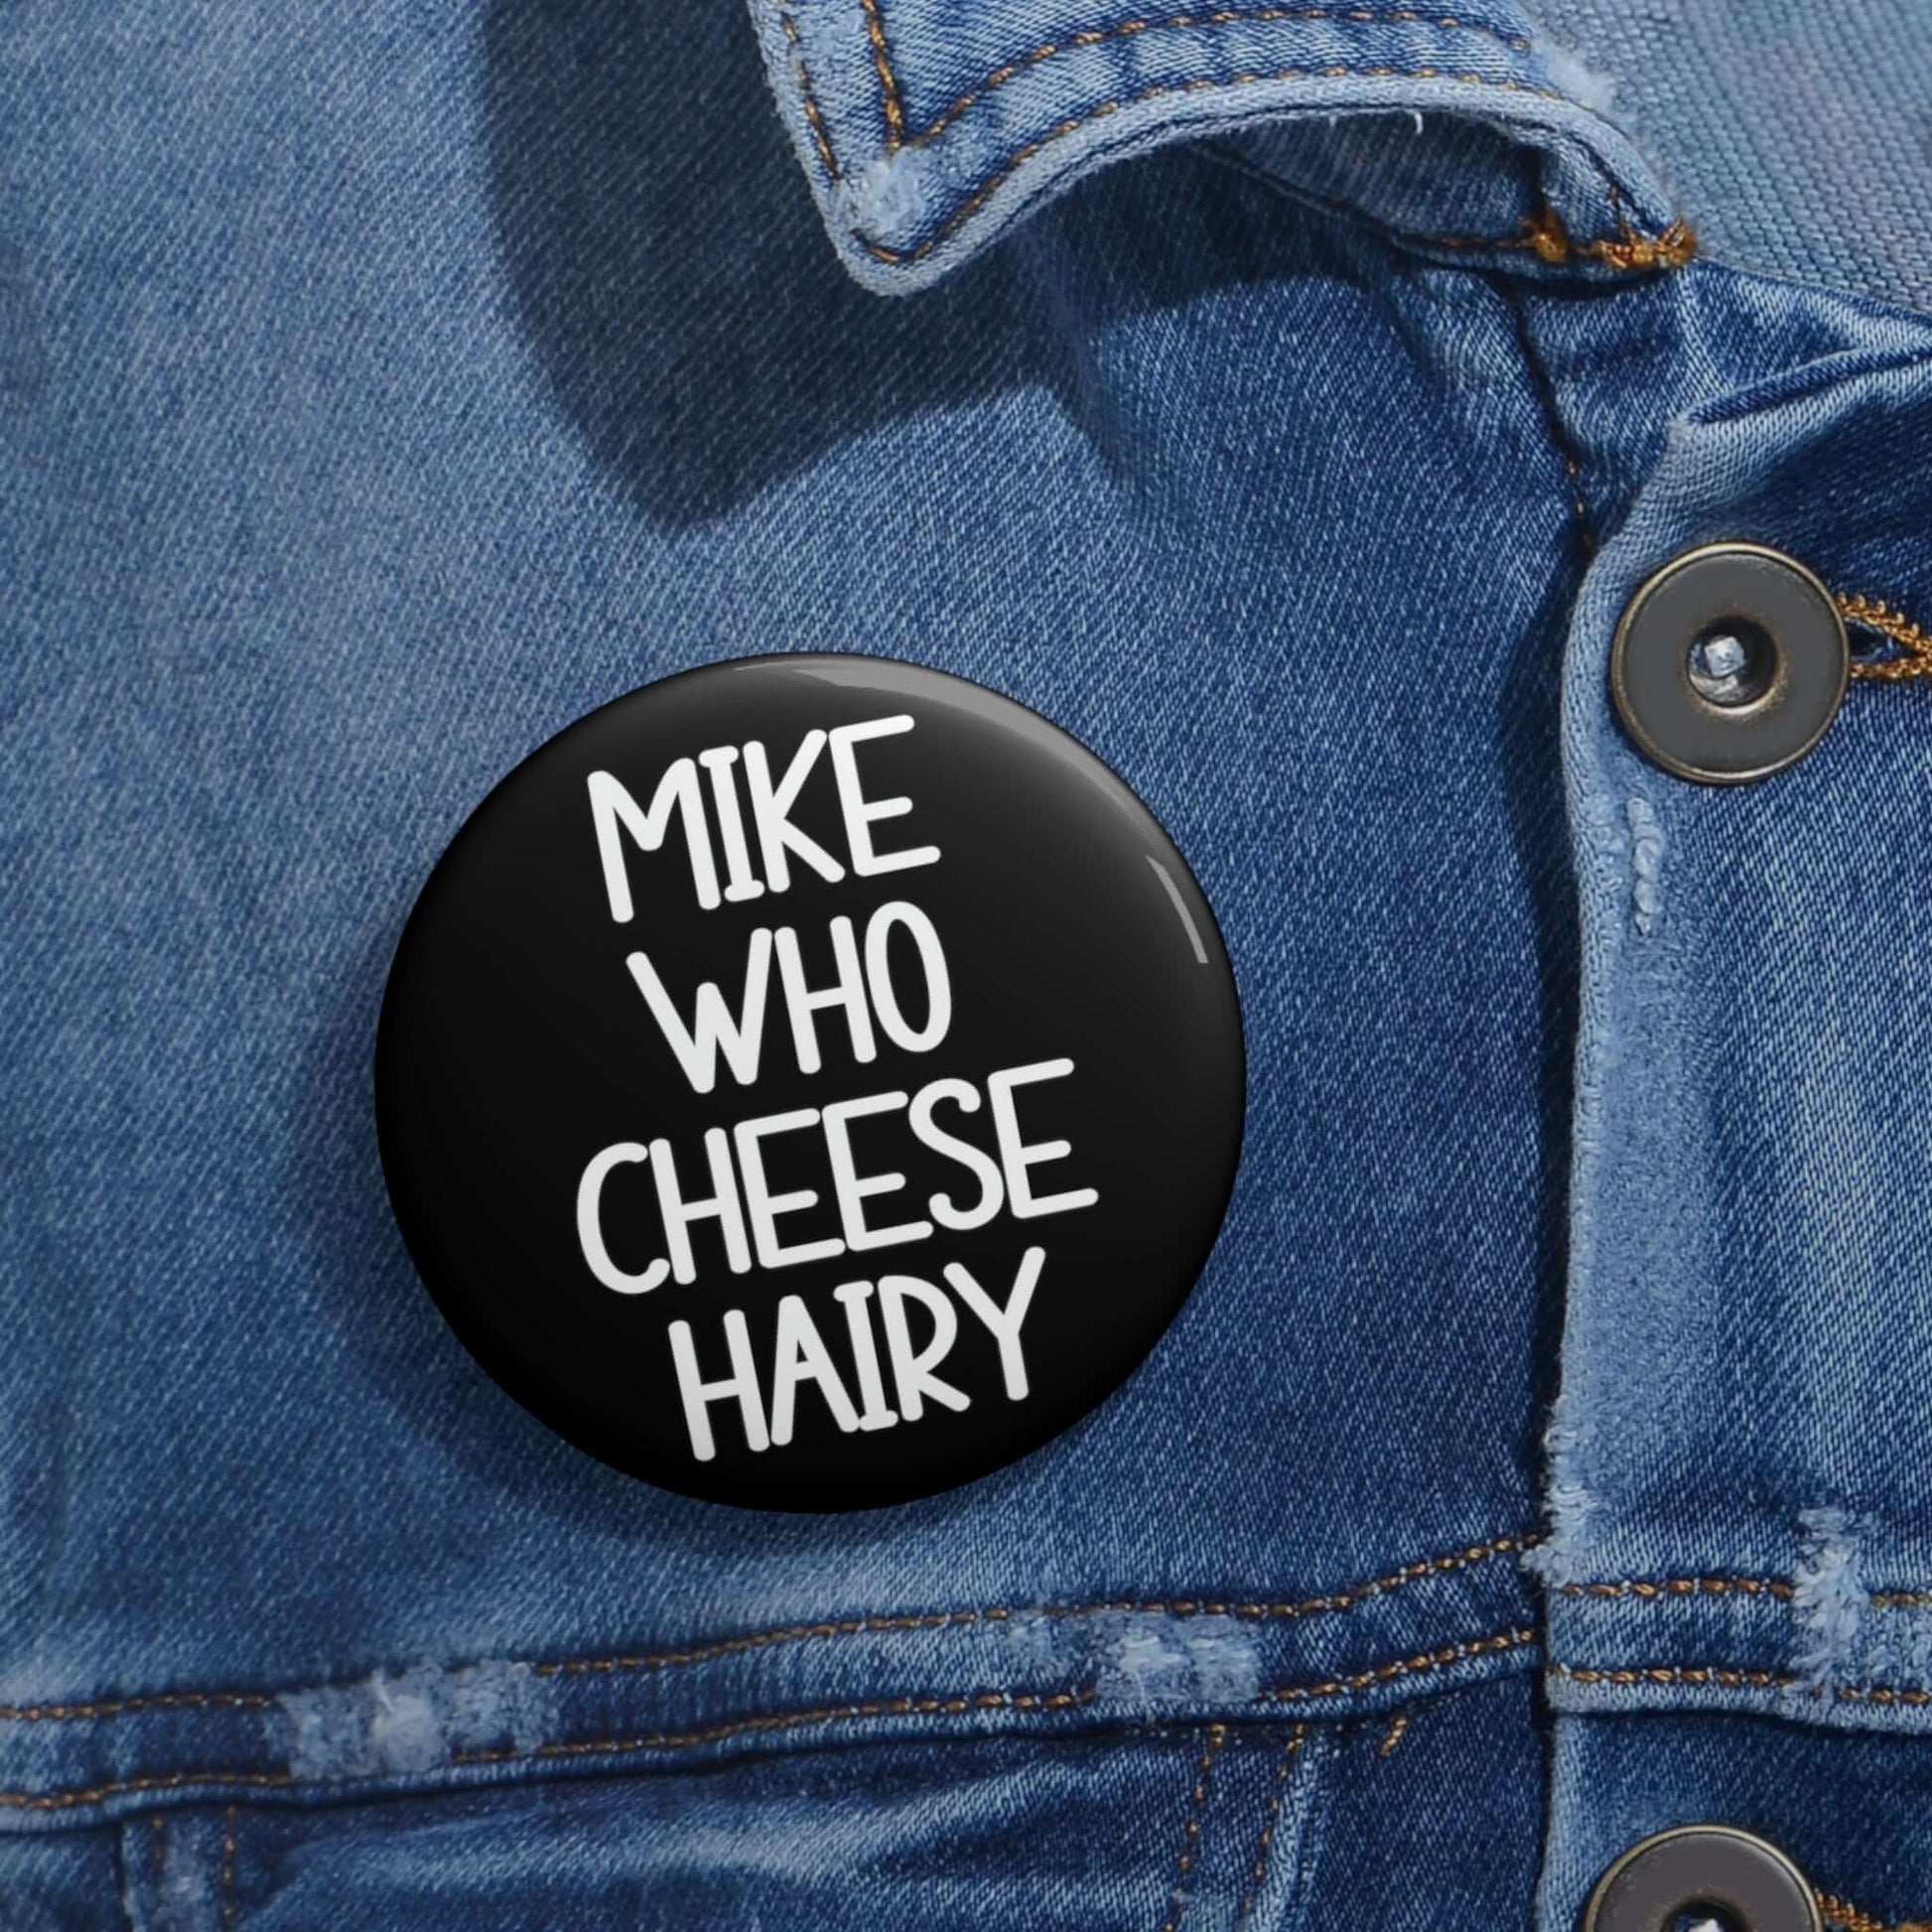 Funny pun button that says Mike who cheese hairy.